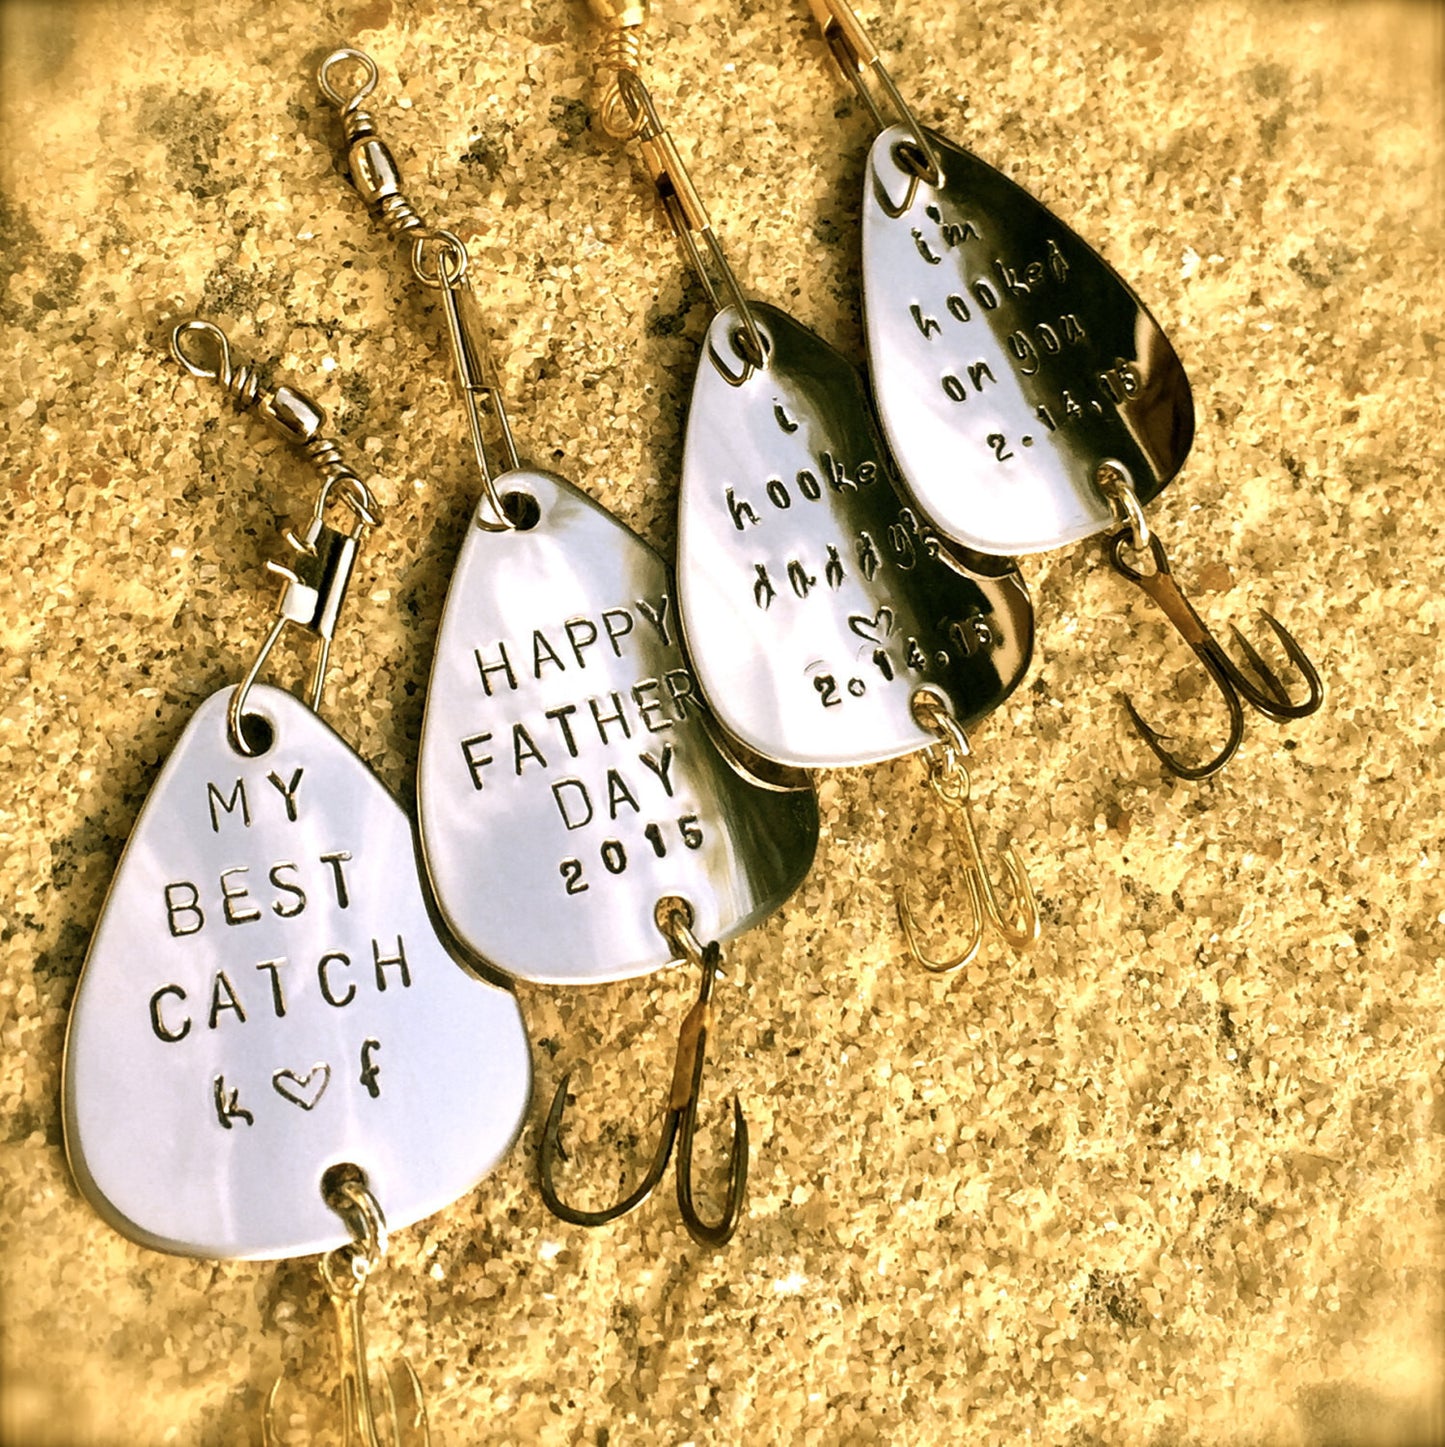 Fishing Lure, Father's Day Gifts, For Him, Boyfriend Gift, Personalized Fishing Lure, Im Hooked On You,natashaaloha, Boyfriend Gift - Natashaaloha, jewelry, bracelets, necklace, keychains, fishing lures, gifts for men, charms, personalized, 